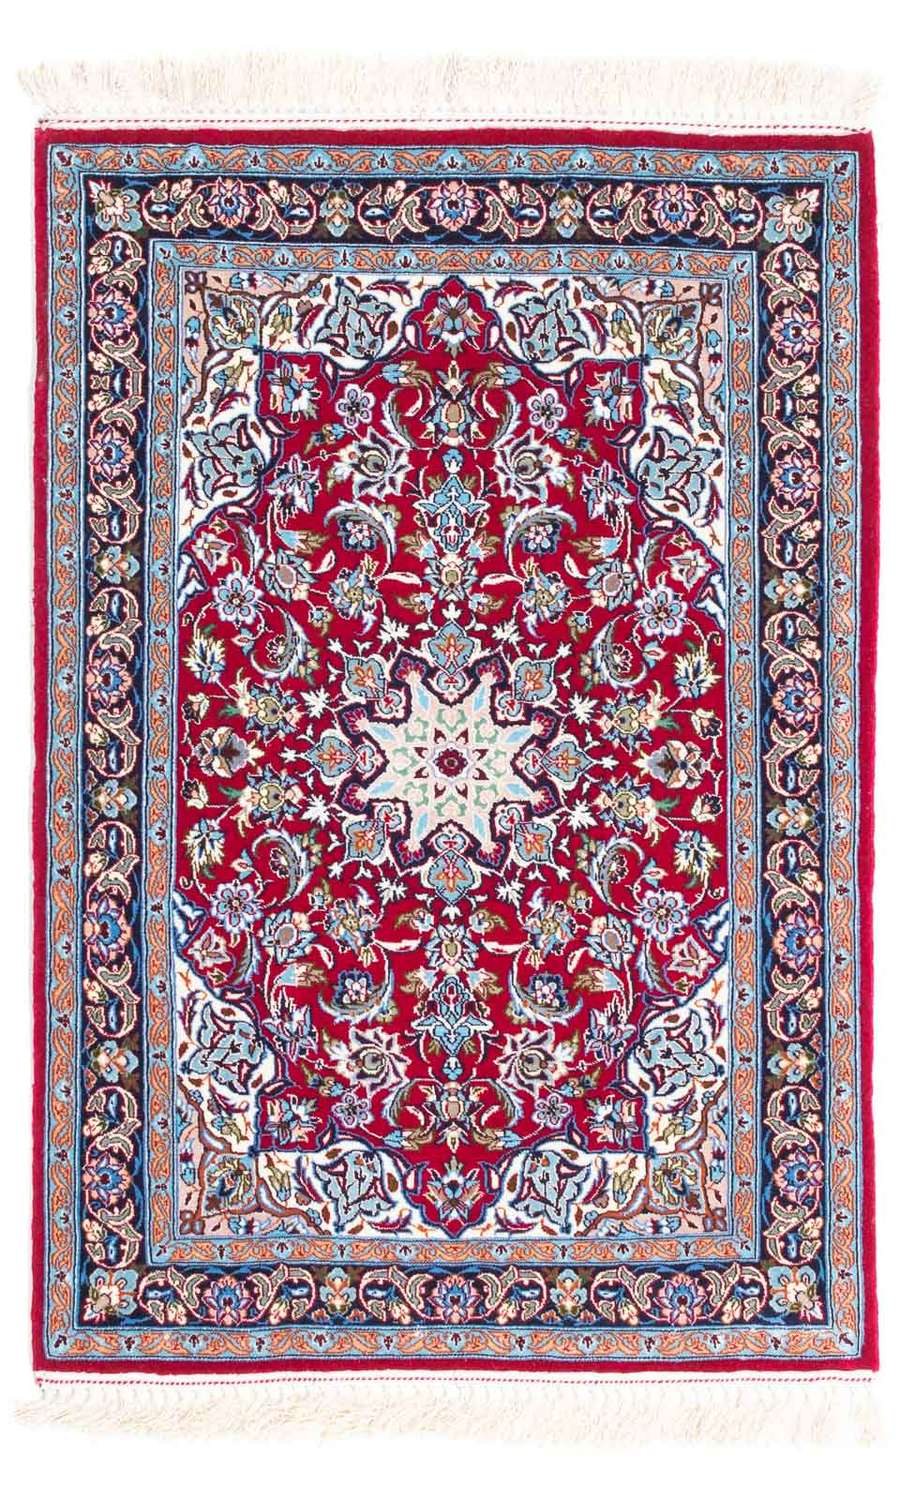 Perser Rug - Isfahan - Premium - 107 x 69 cm - red